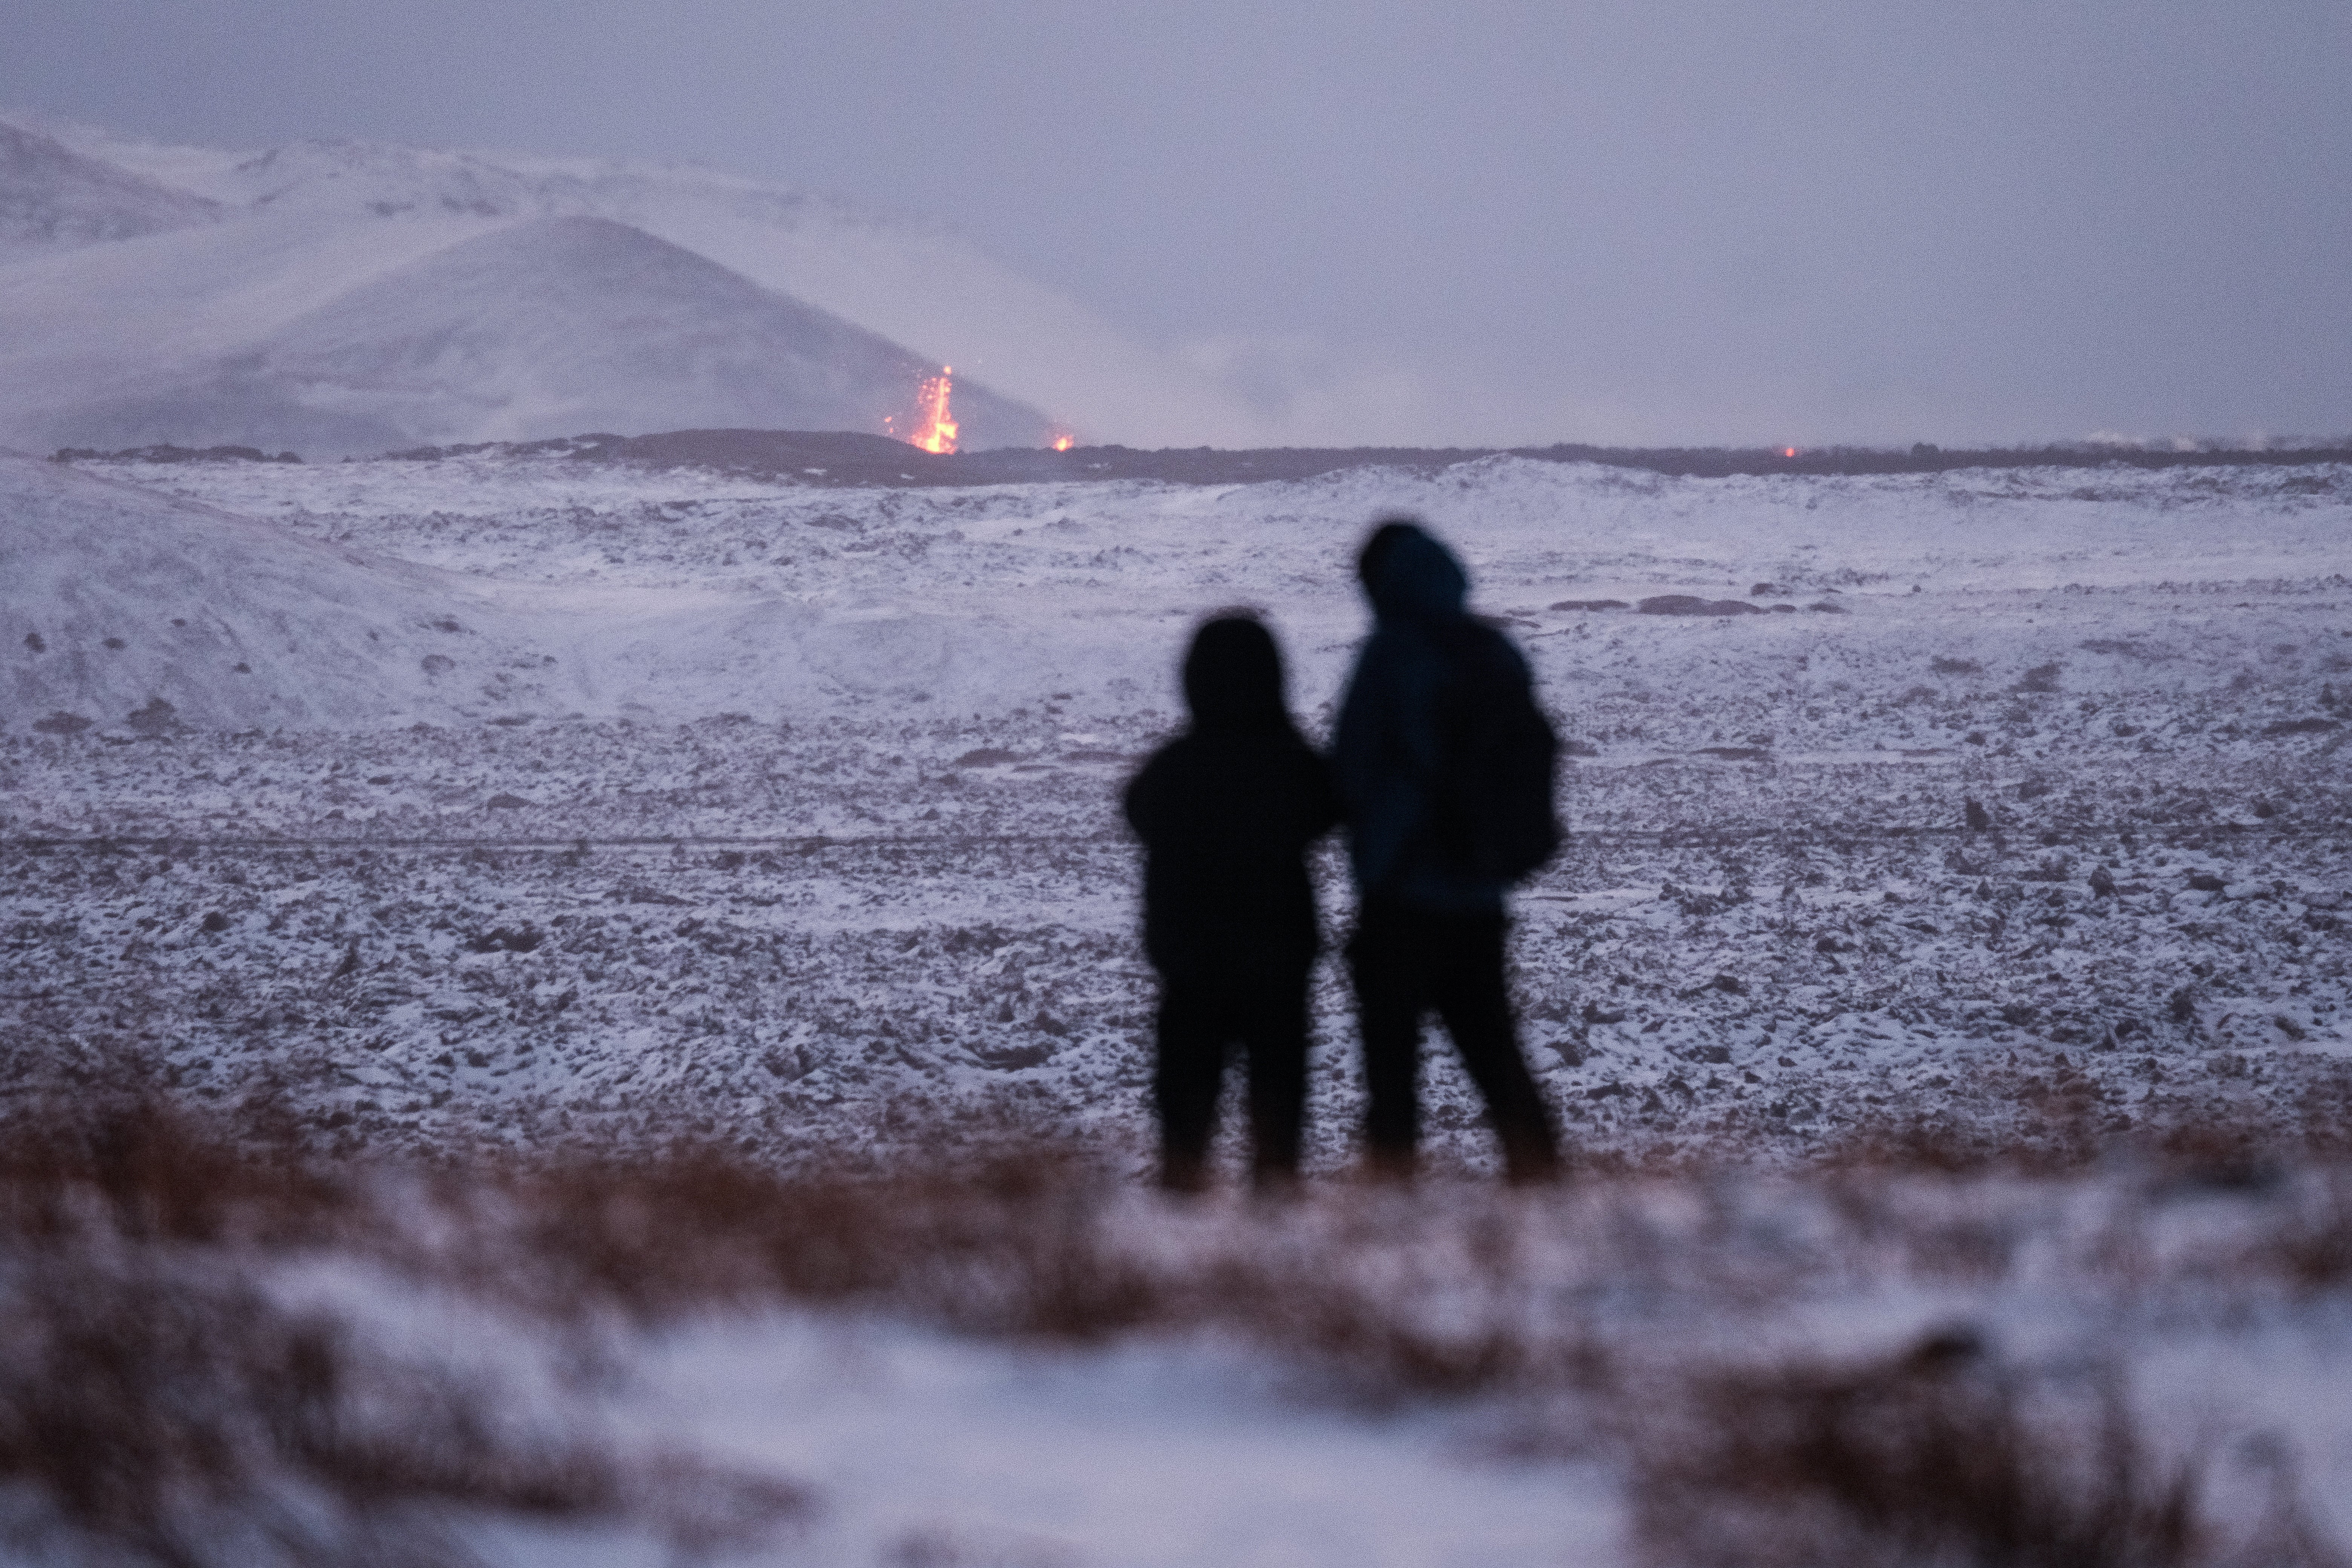 Onlookers gather to watch the lava flow after the eruption on the Reykjanes Peninsula